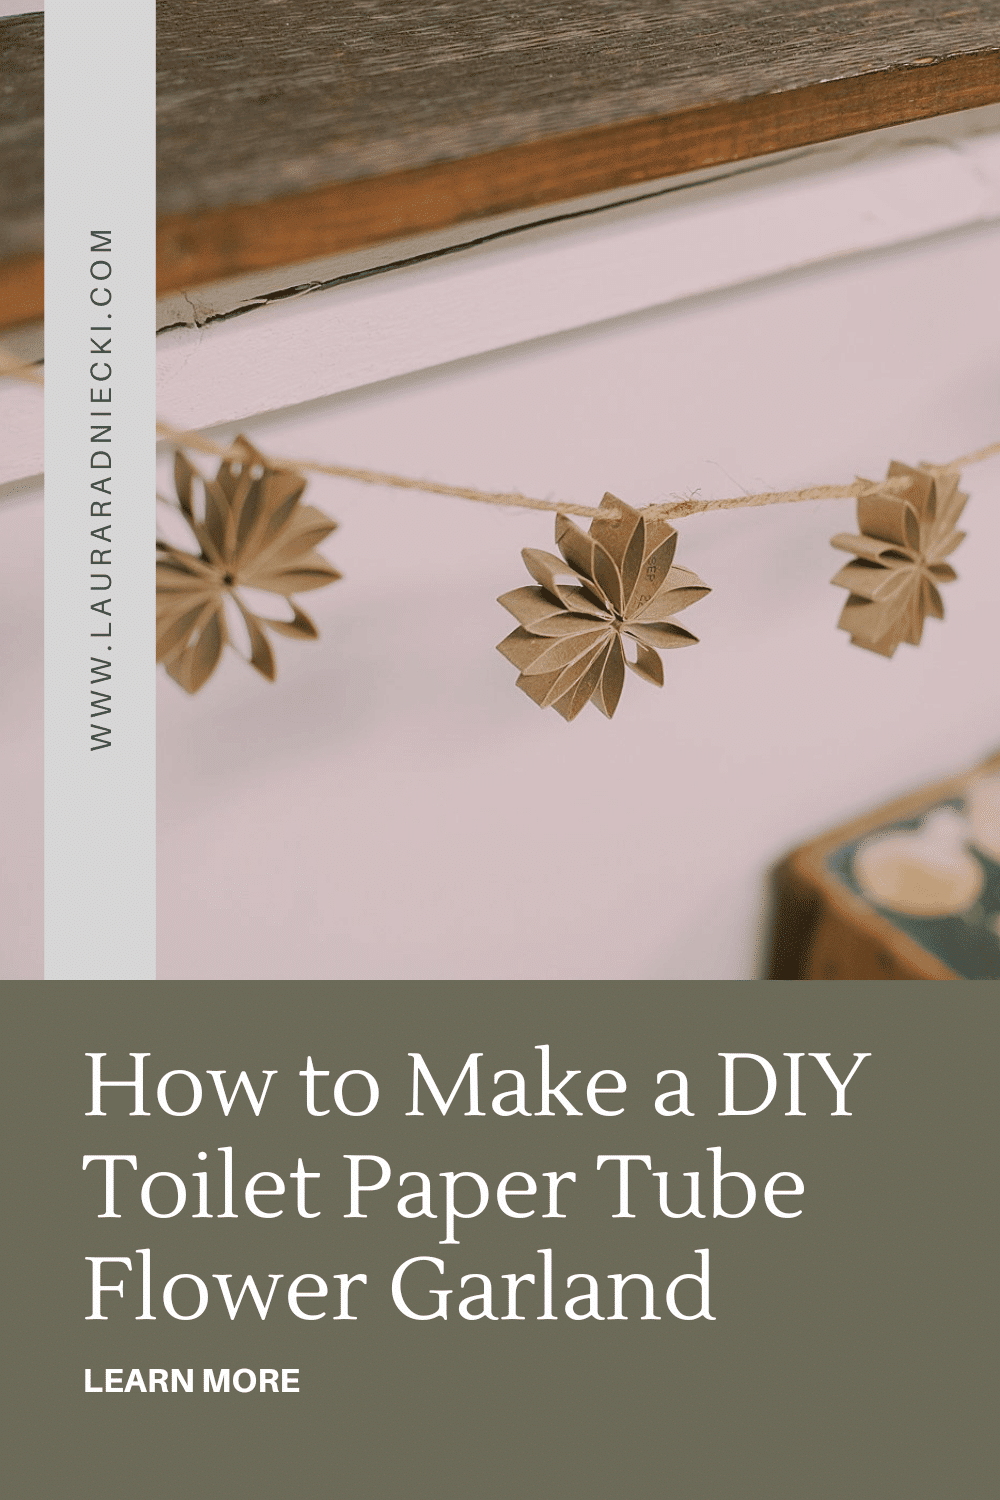 How to Make a Toilet Paper Tube Flower Garland